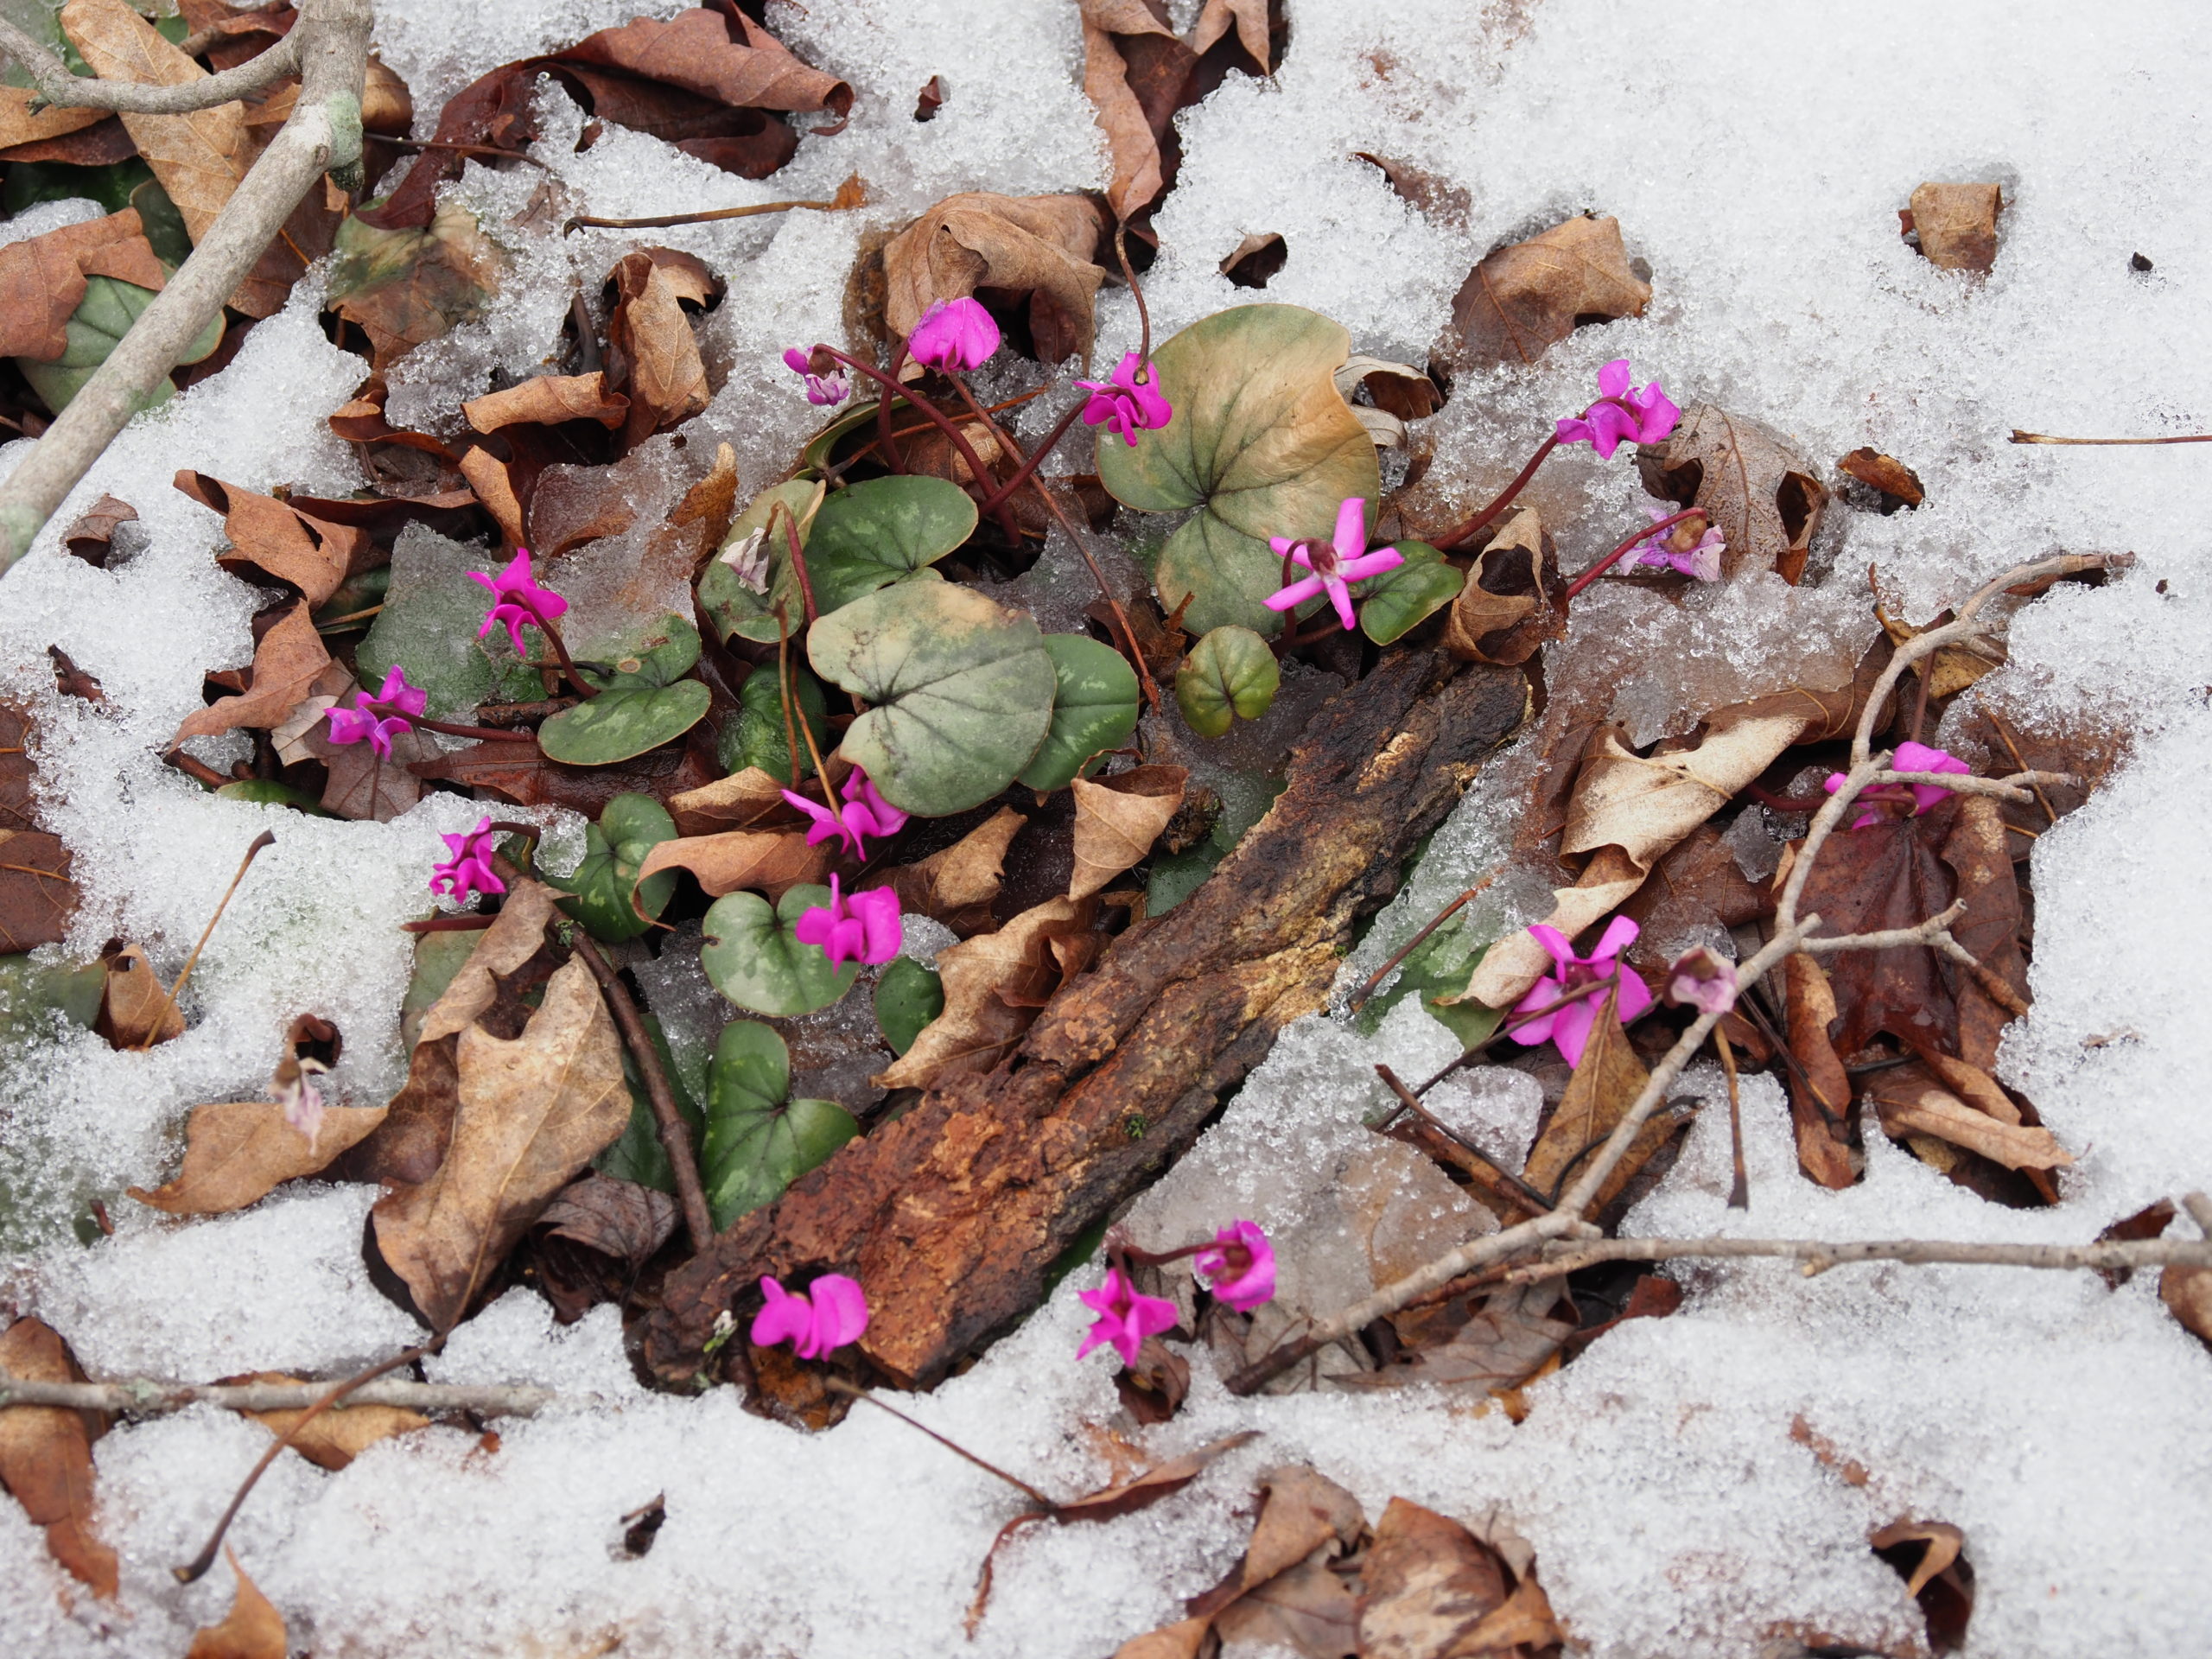 When applying winter mulches some plants need to be left uncovered. These Cyclamen coum don’t appreciate being mulched and the mulch will also hide their magnificent February and early March flowers under pines, oaks and maples.